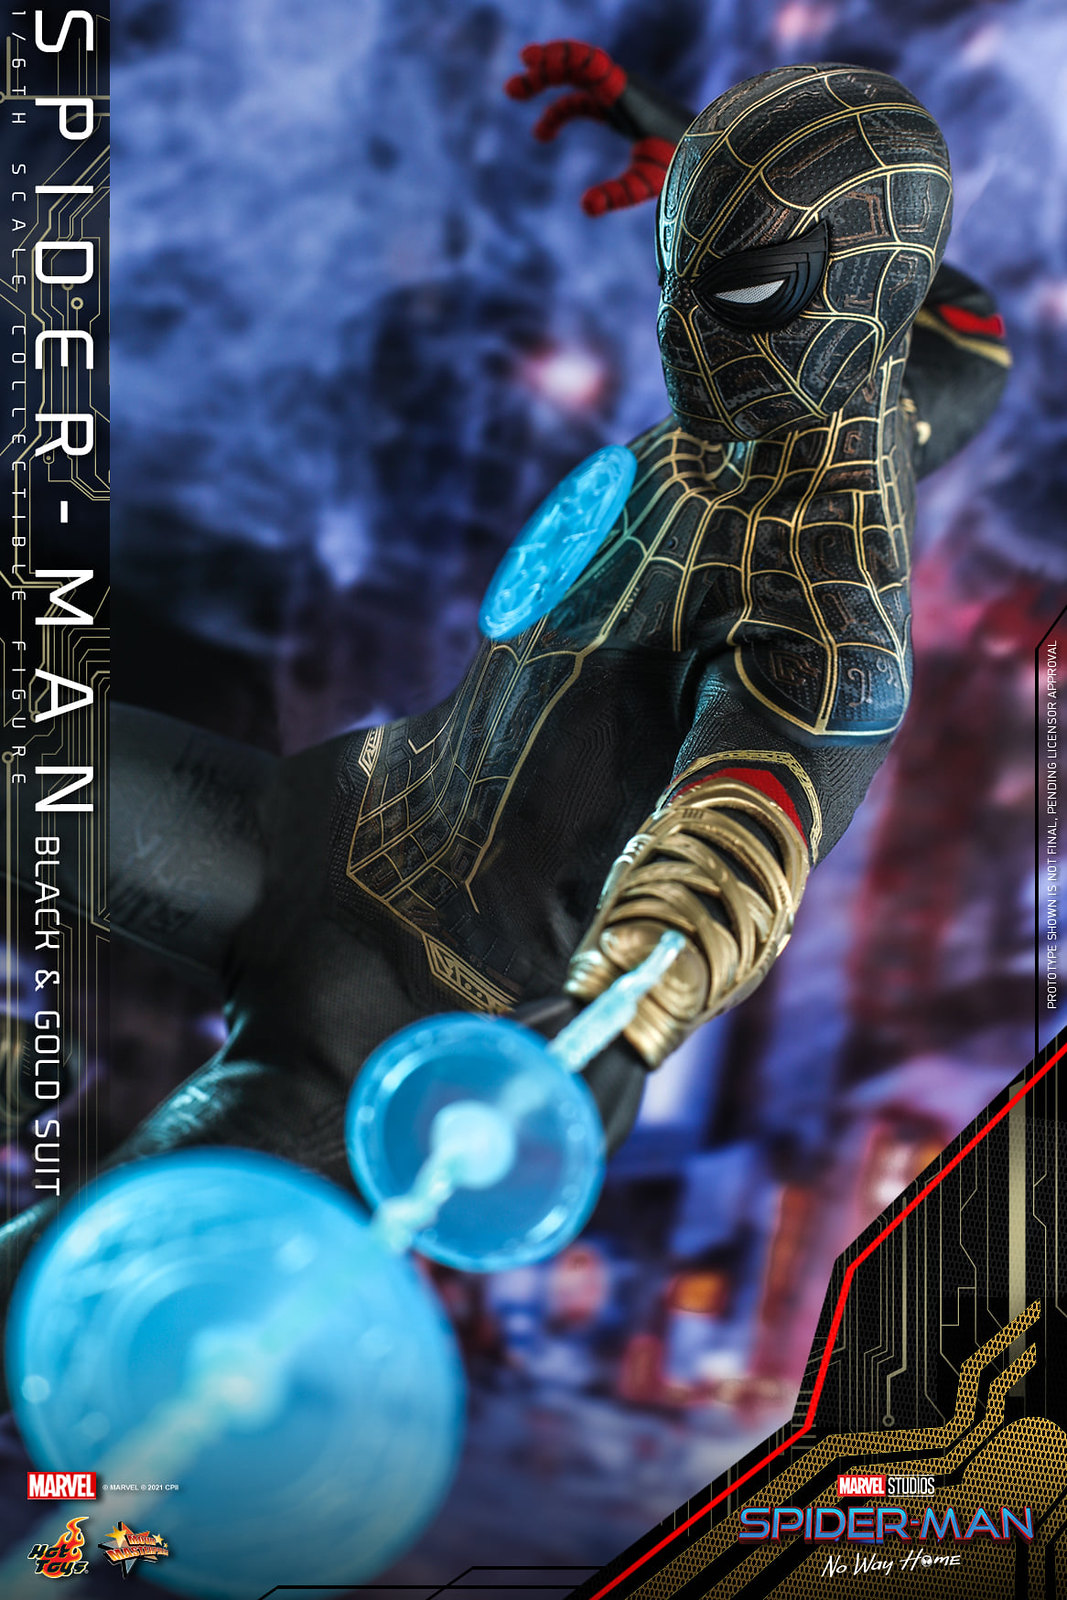 NEW PRODUCT: Hot Toys 【Spider-Man: No Way Home - 1/6th scale Spider-Man (Black & Gold Suit) Collectible Figure】 51311991509_3d757d0c3b_h